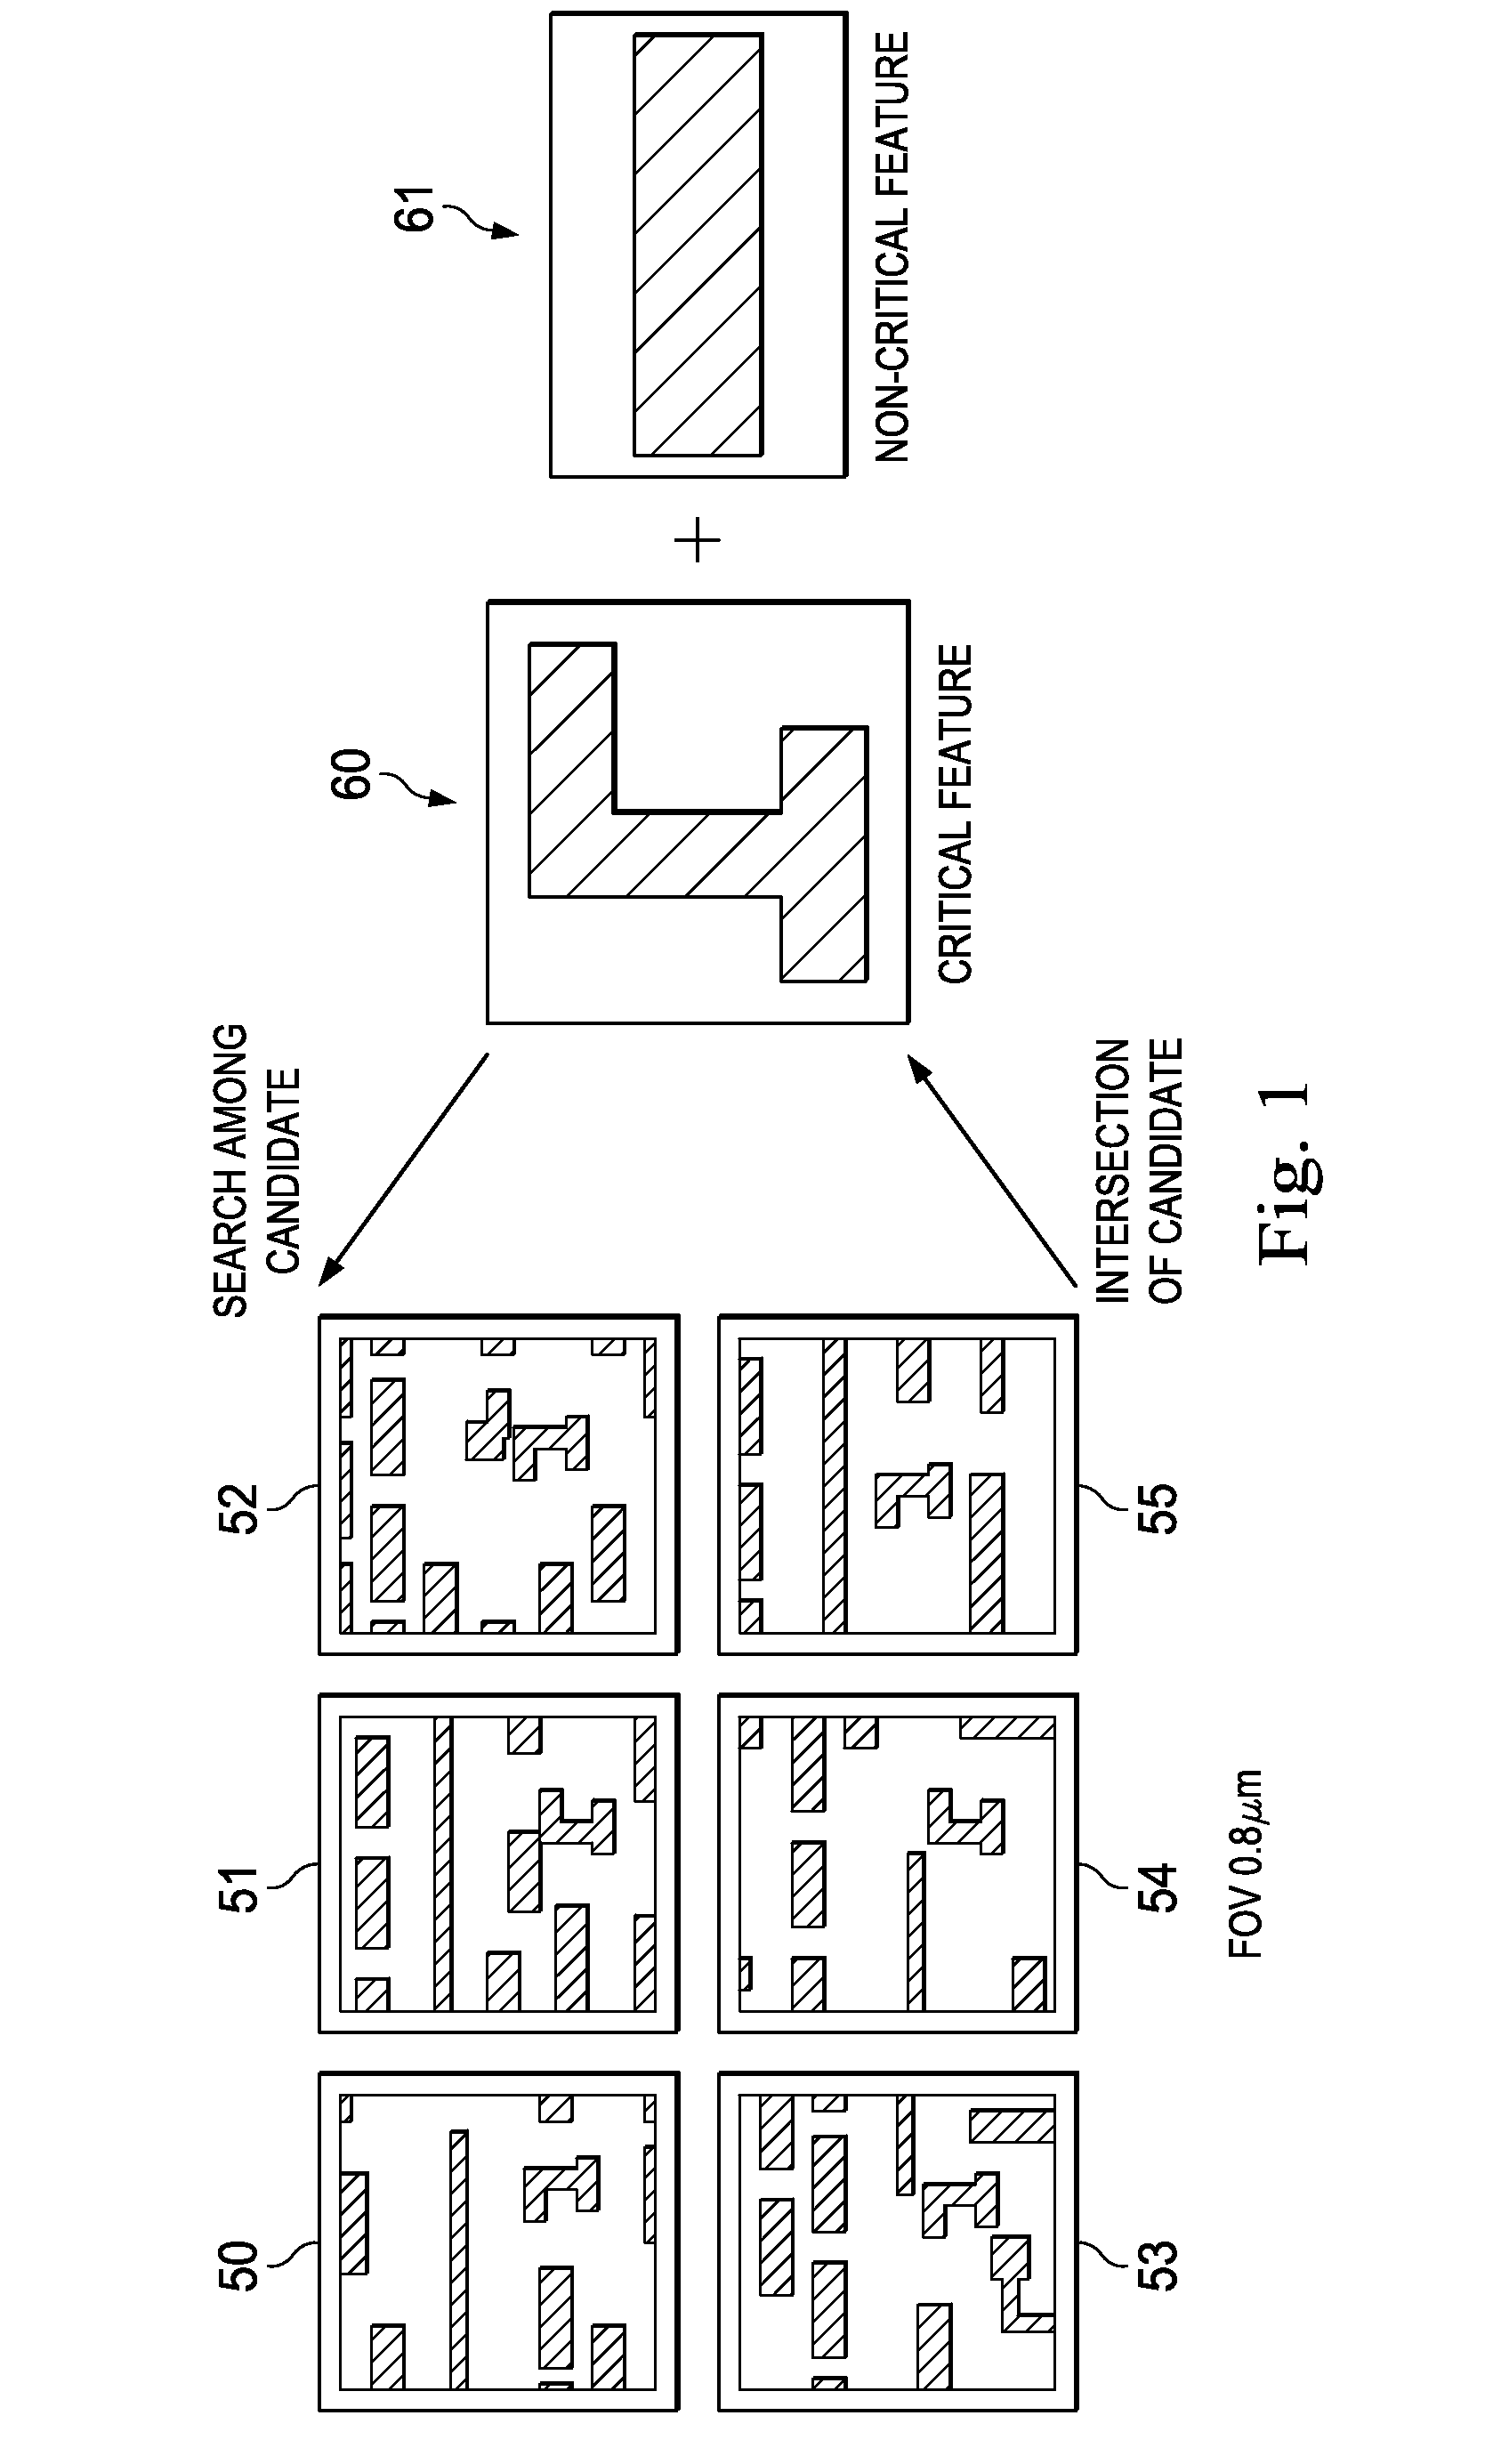 Method and Apparatus for Extracting Systematic Defects